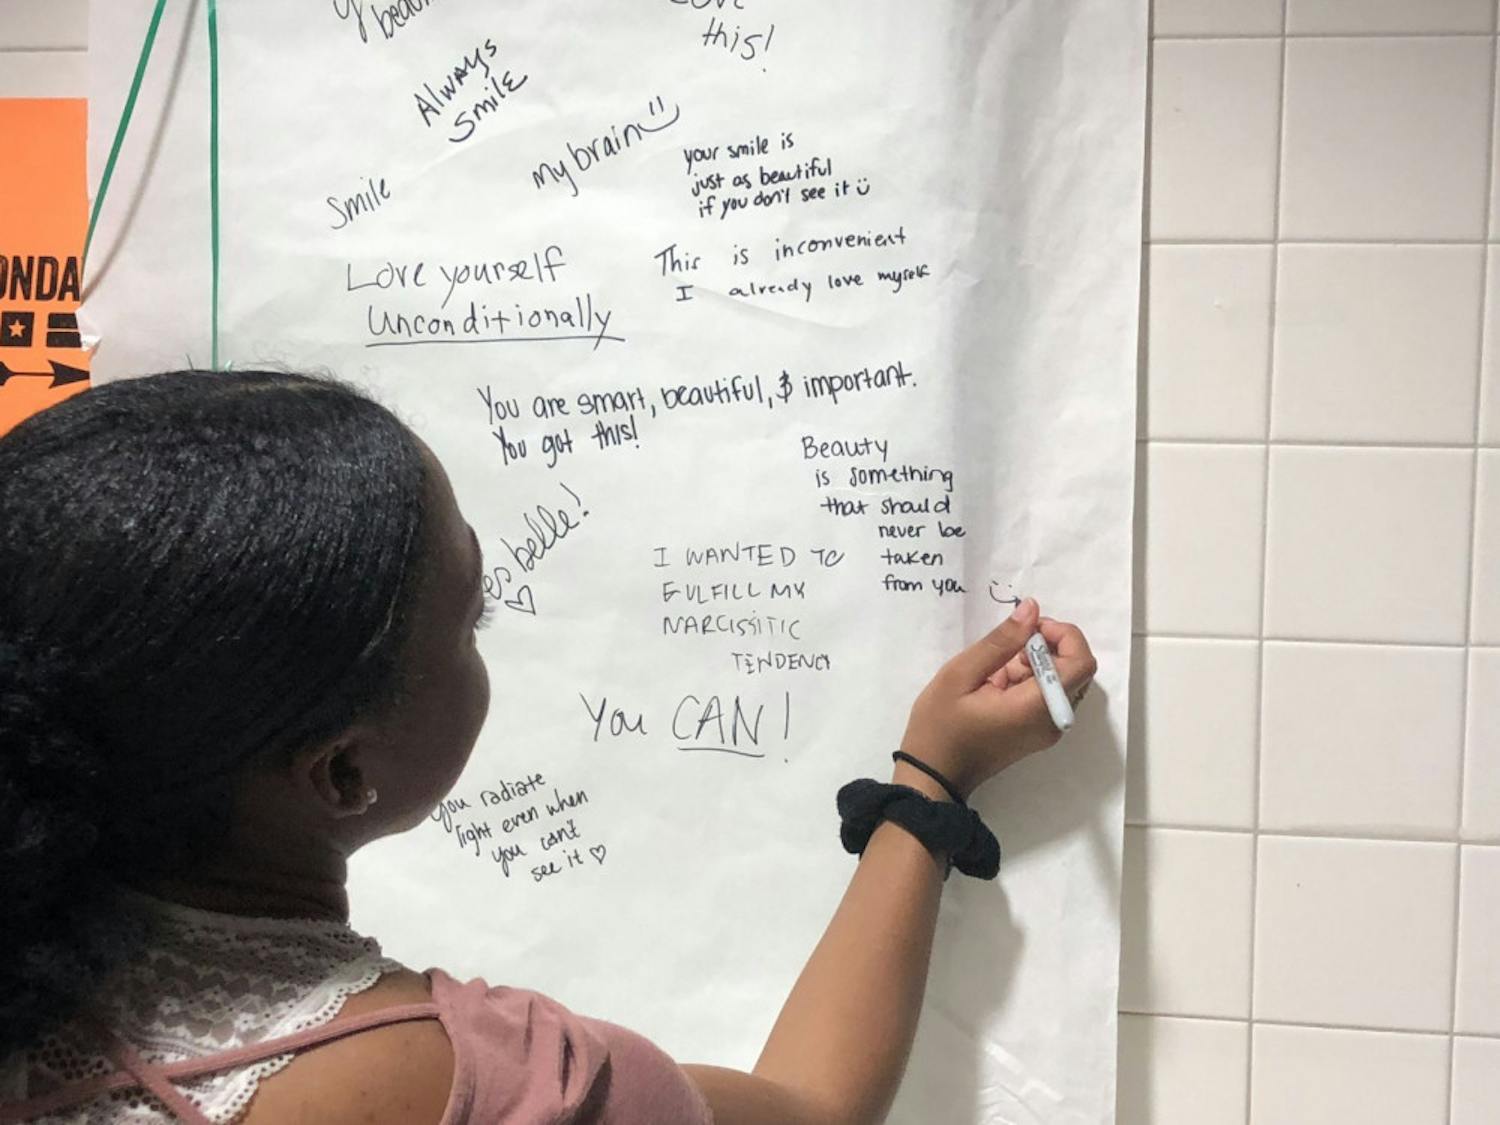 Marissa Jadotte, a 20-year-old UF health science sophomore, wrote a message to remind fellow students that 'beauty is something that should never be taken away from you."&nbsp;